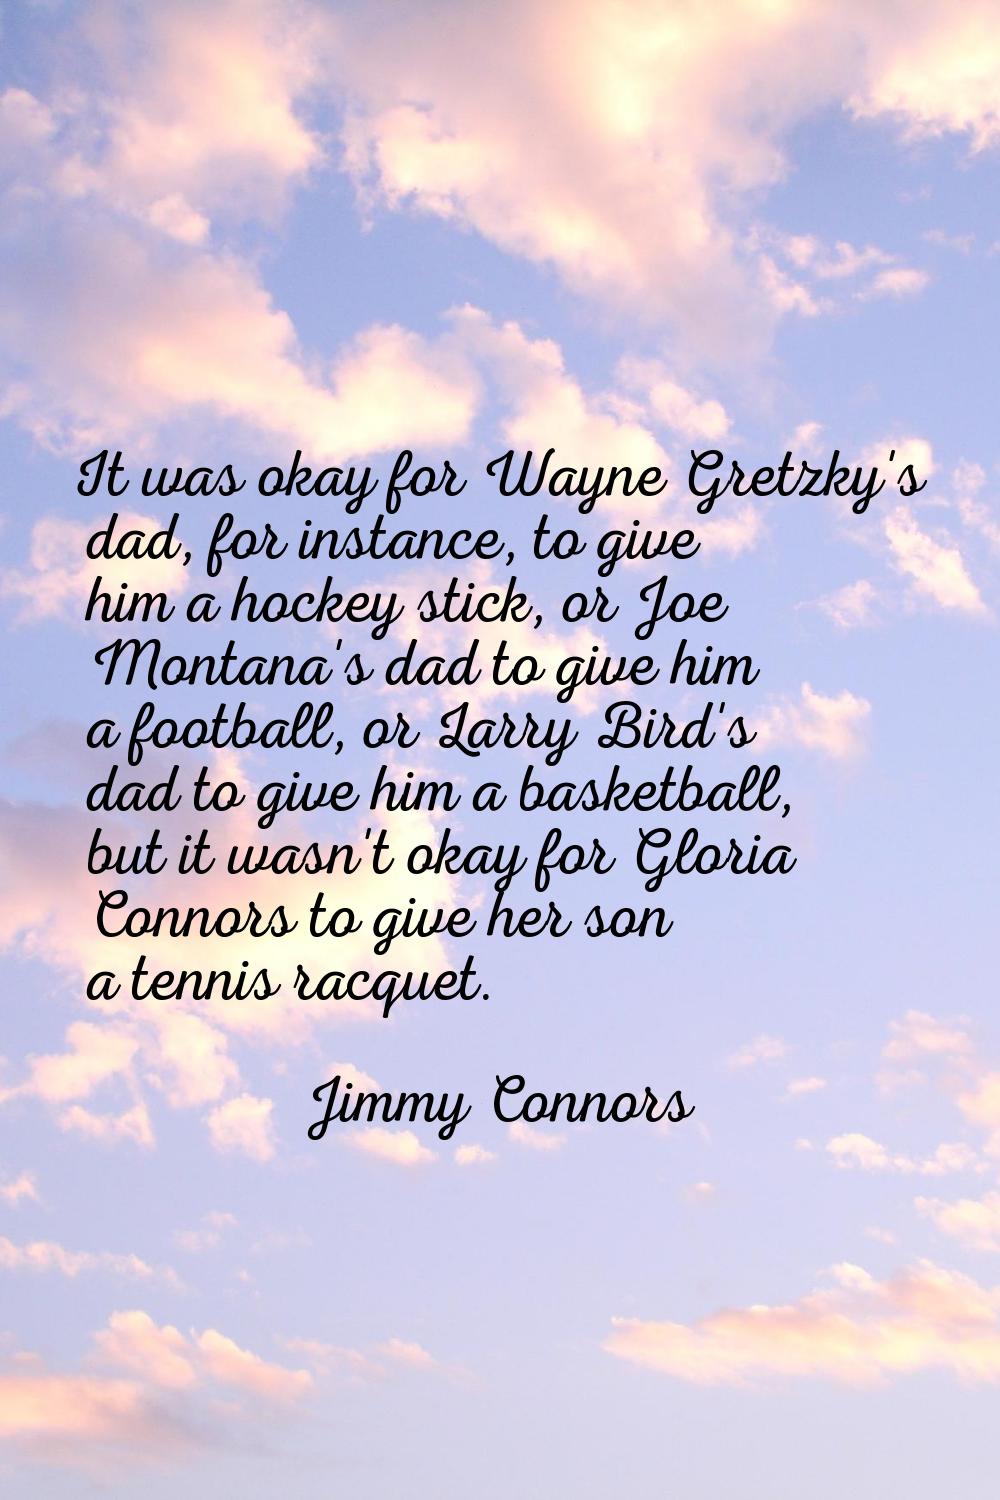 It was okay for Wayne Gretzky's dad, for instance, to give him a hockey stick, or Joe Montana's dad